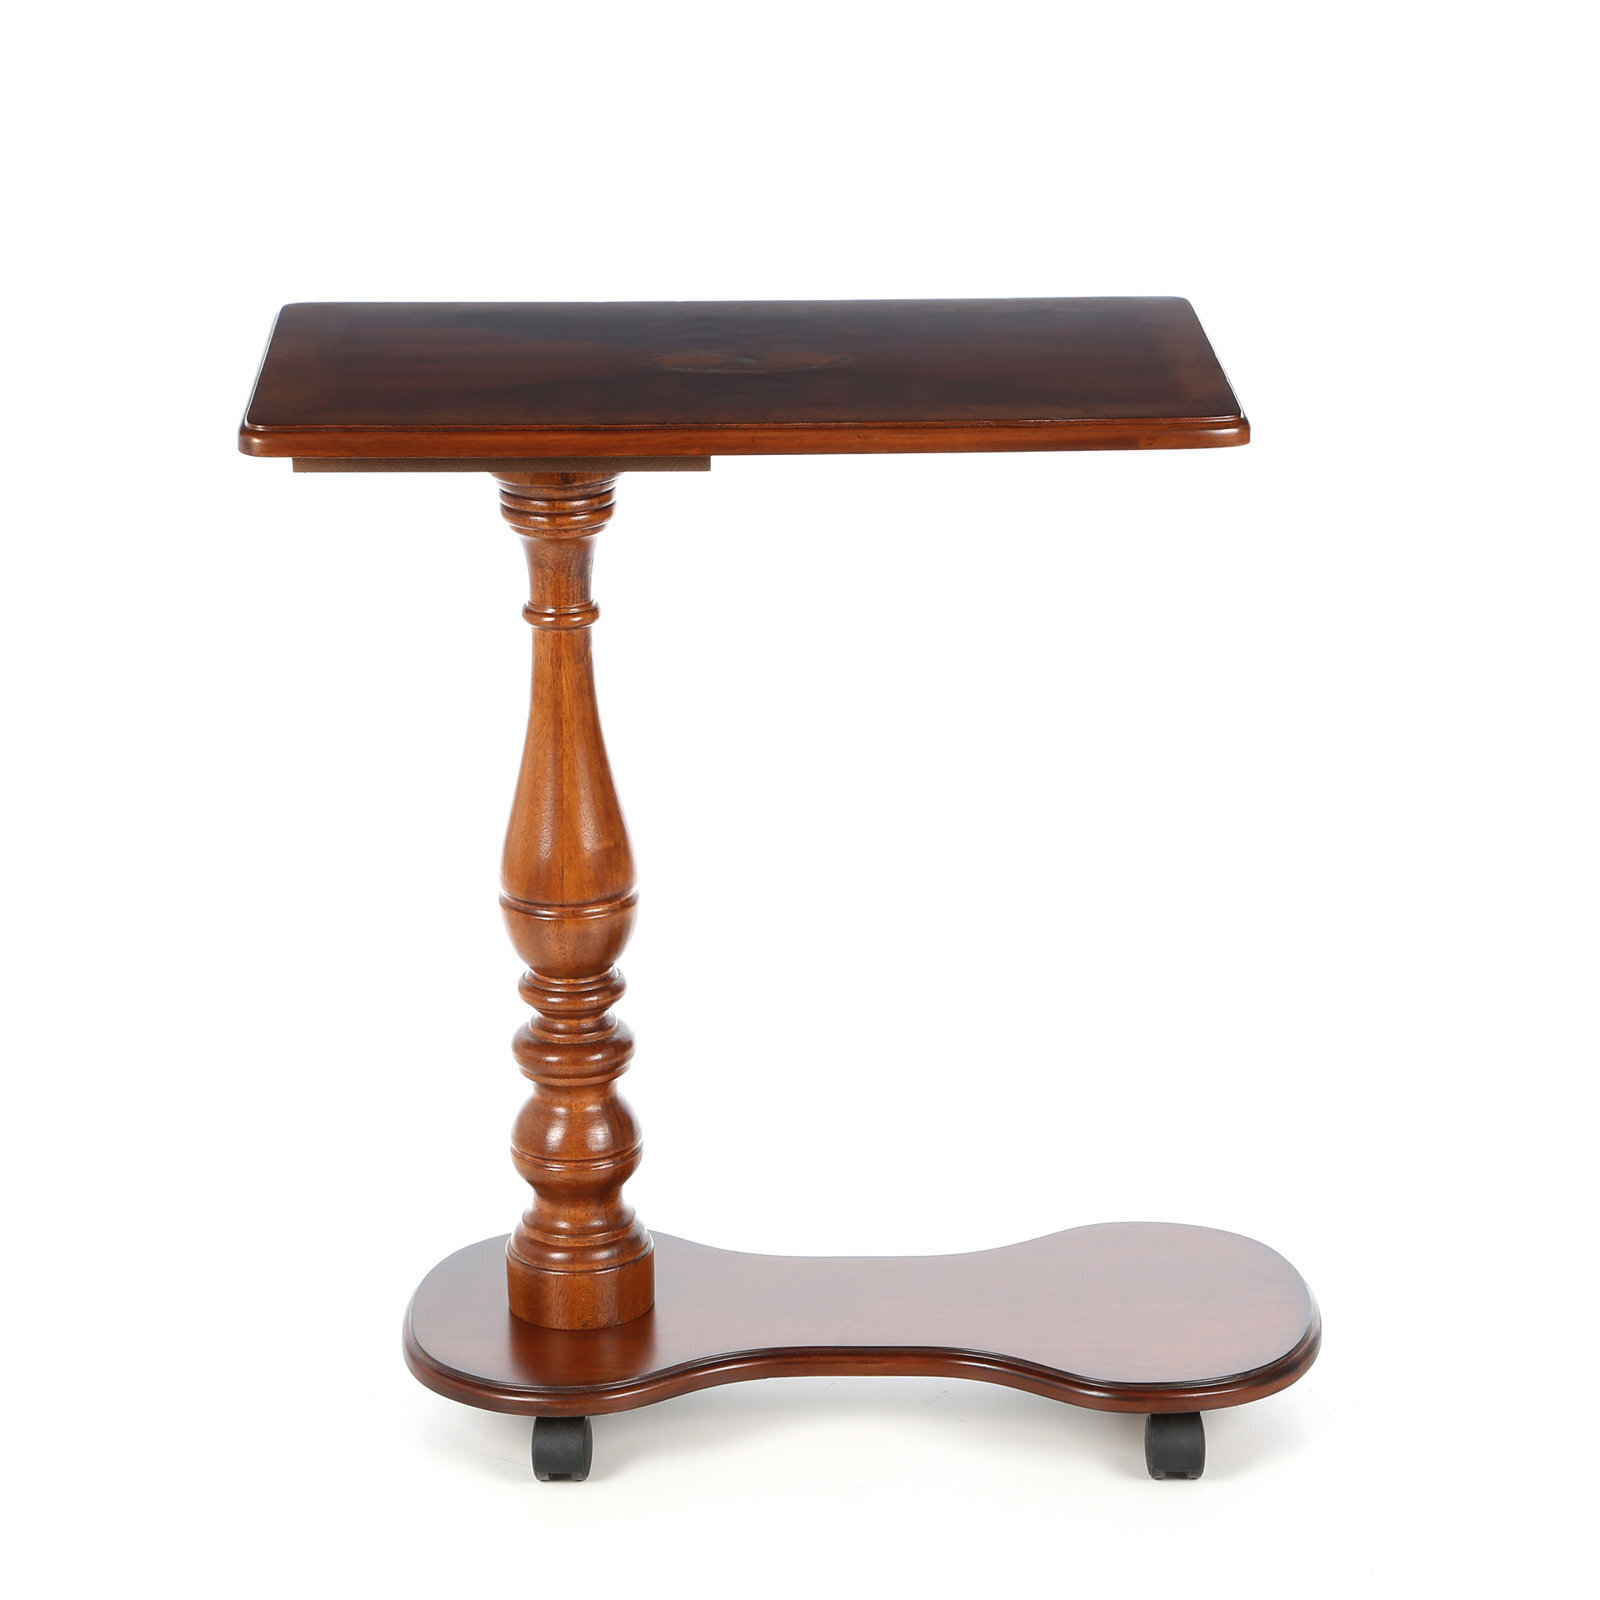 Butler’s Table with Turned Leg